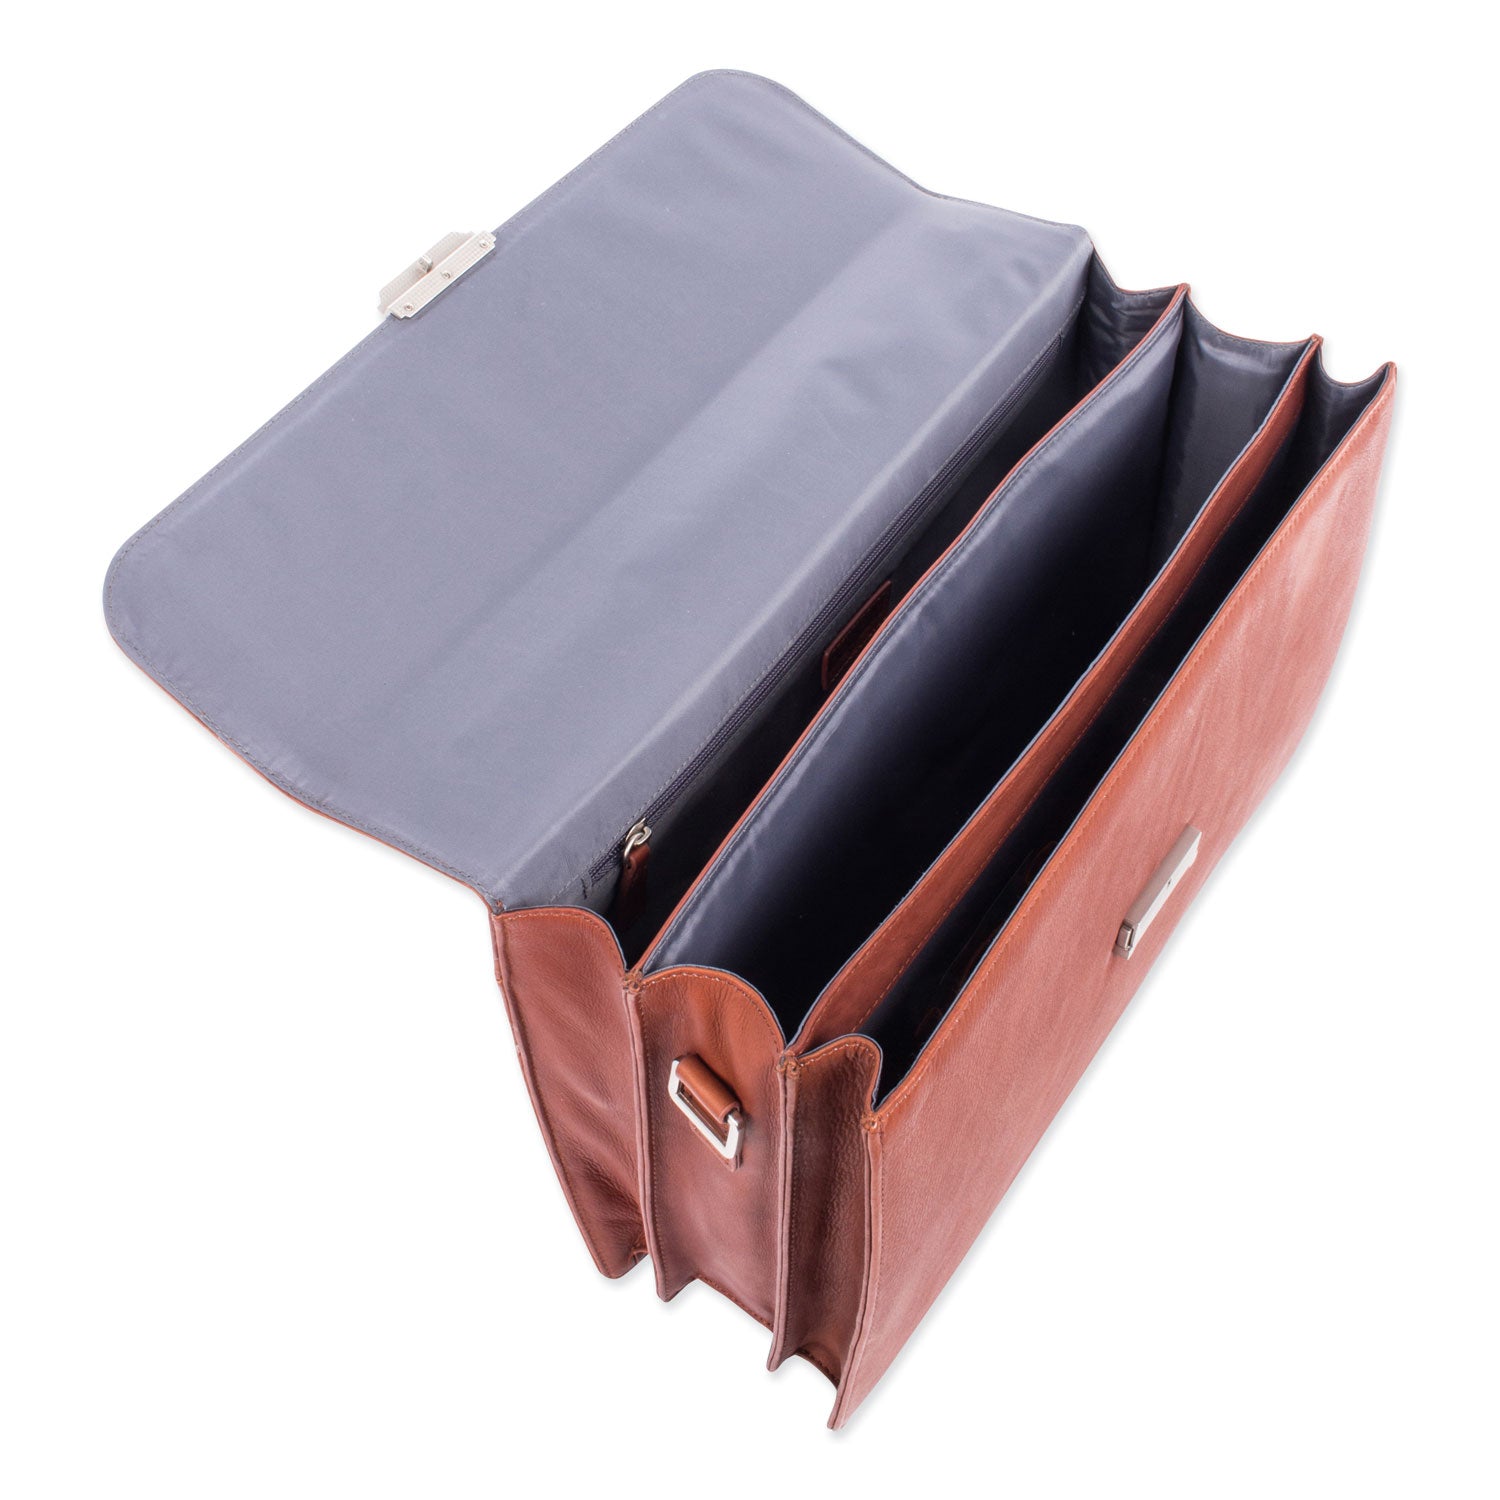 milestone-briefcase-fits-devices-up-to-156-leather-5-x-5-x-12-cognac_swz49545807sm - 6